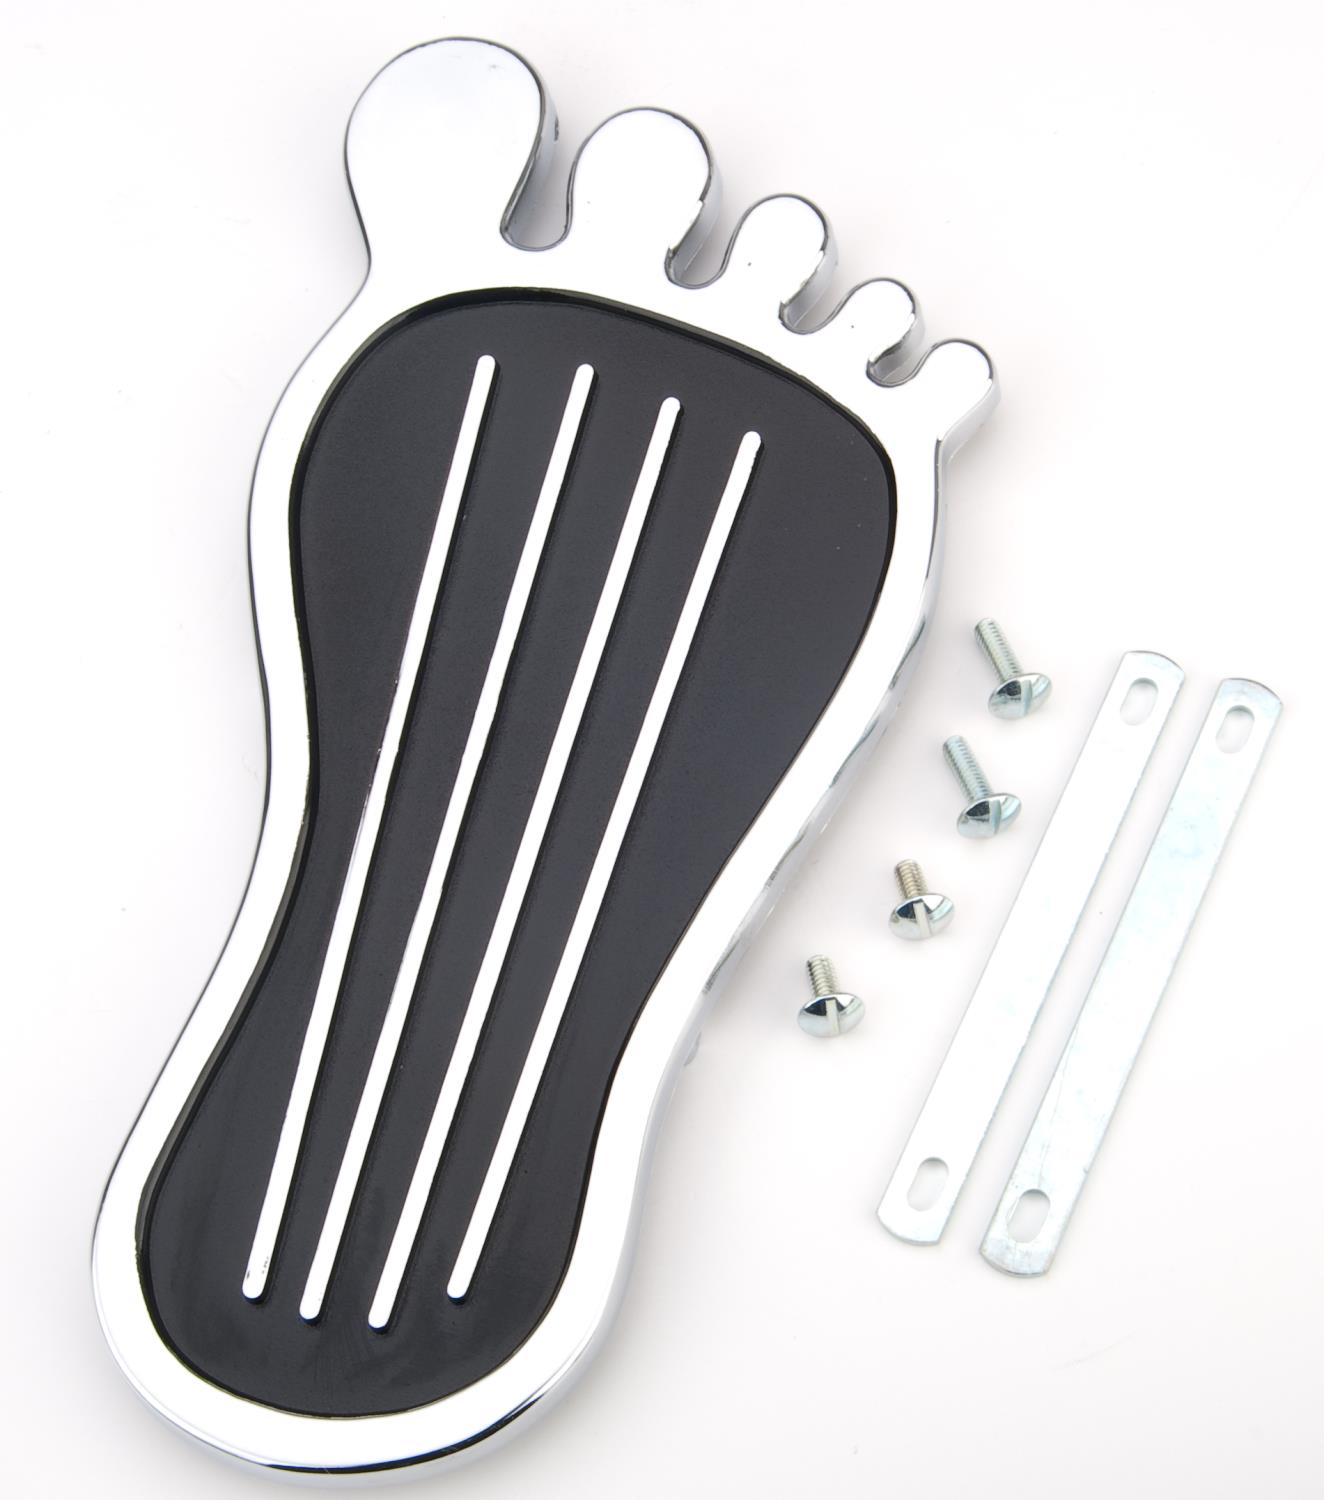 R8520 Pedal Pad Barefoot Gas Pedal Rpc Racing Power